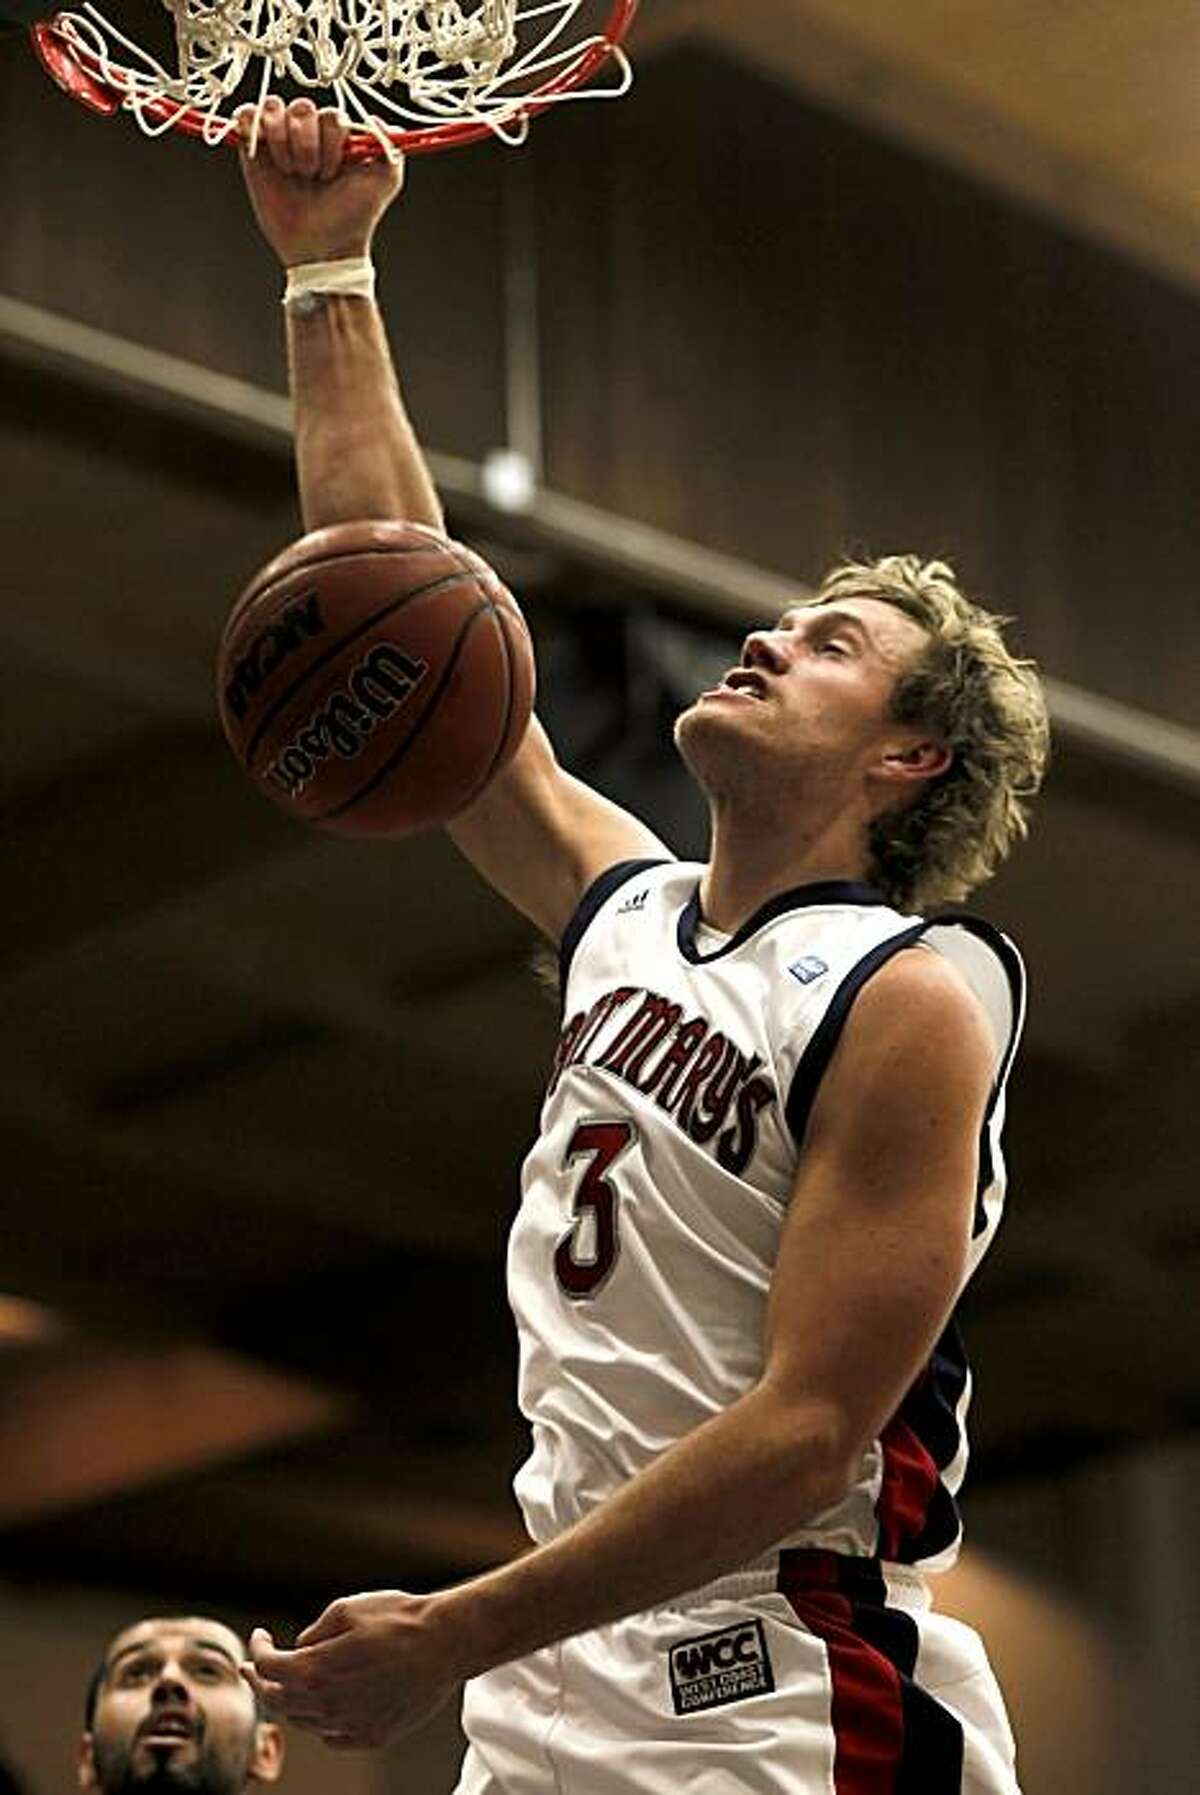 Gael's Mitchell Young, (3) with a slam dunk during first half action as the St. Mary's Gaels take on the Hartford Hawks at McKeon Pavilion in Moraga, Calif. on Friday Dev. 31, 2010.